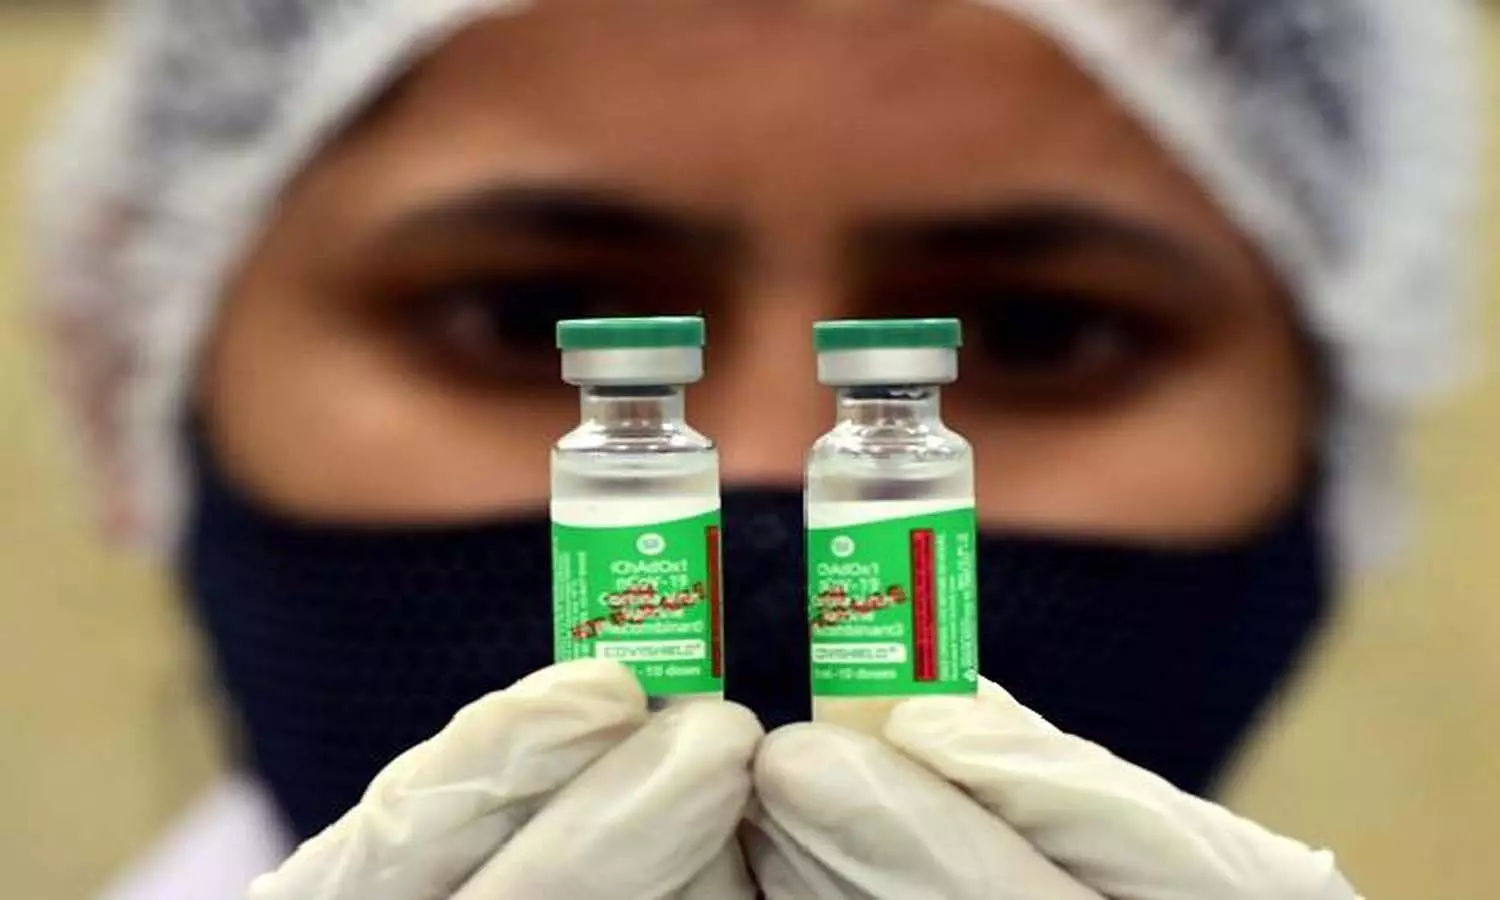 26 potential cases of bleeding, clotting after Covishield vaccine in India